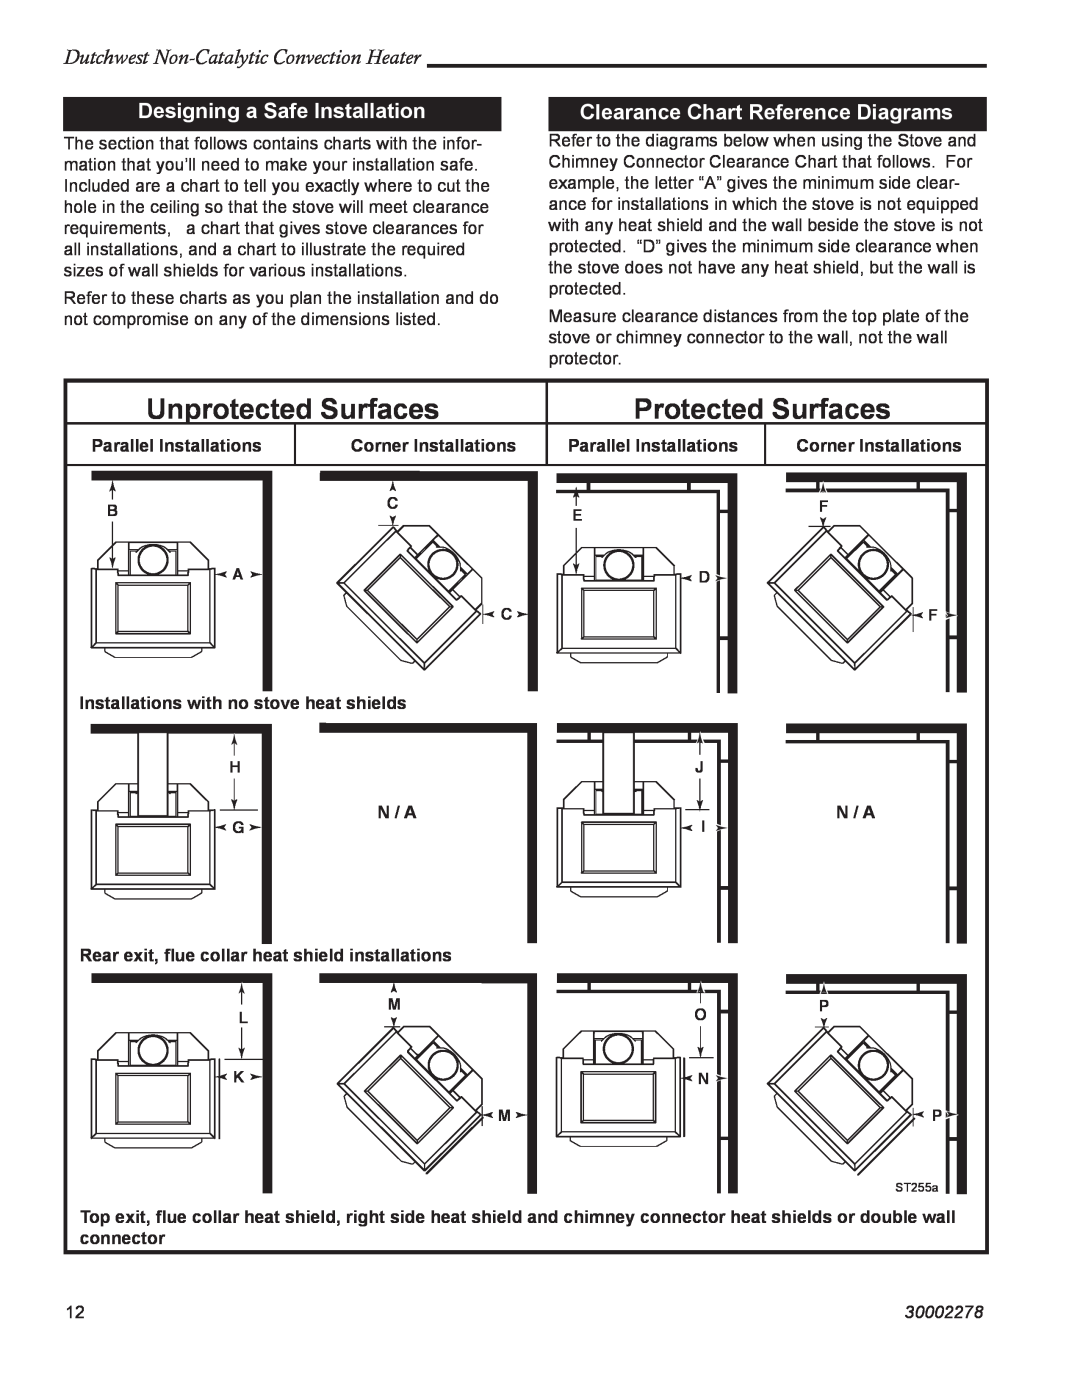 Vermont Casting 2478 Designing a Safe Installation, Clearance Chart Reference Diagrams, Unprotected Surfaces, 30002278 